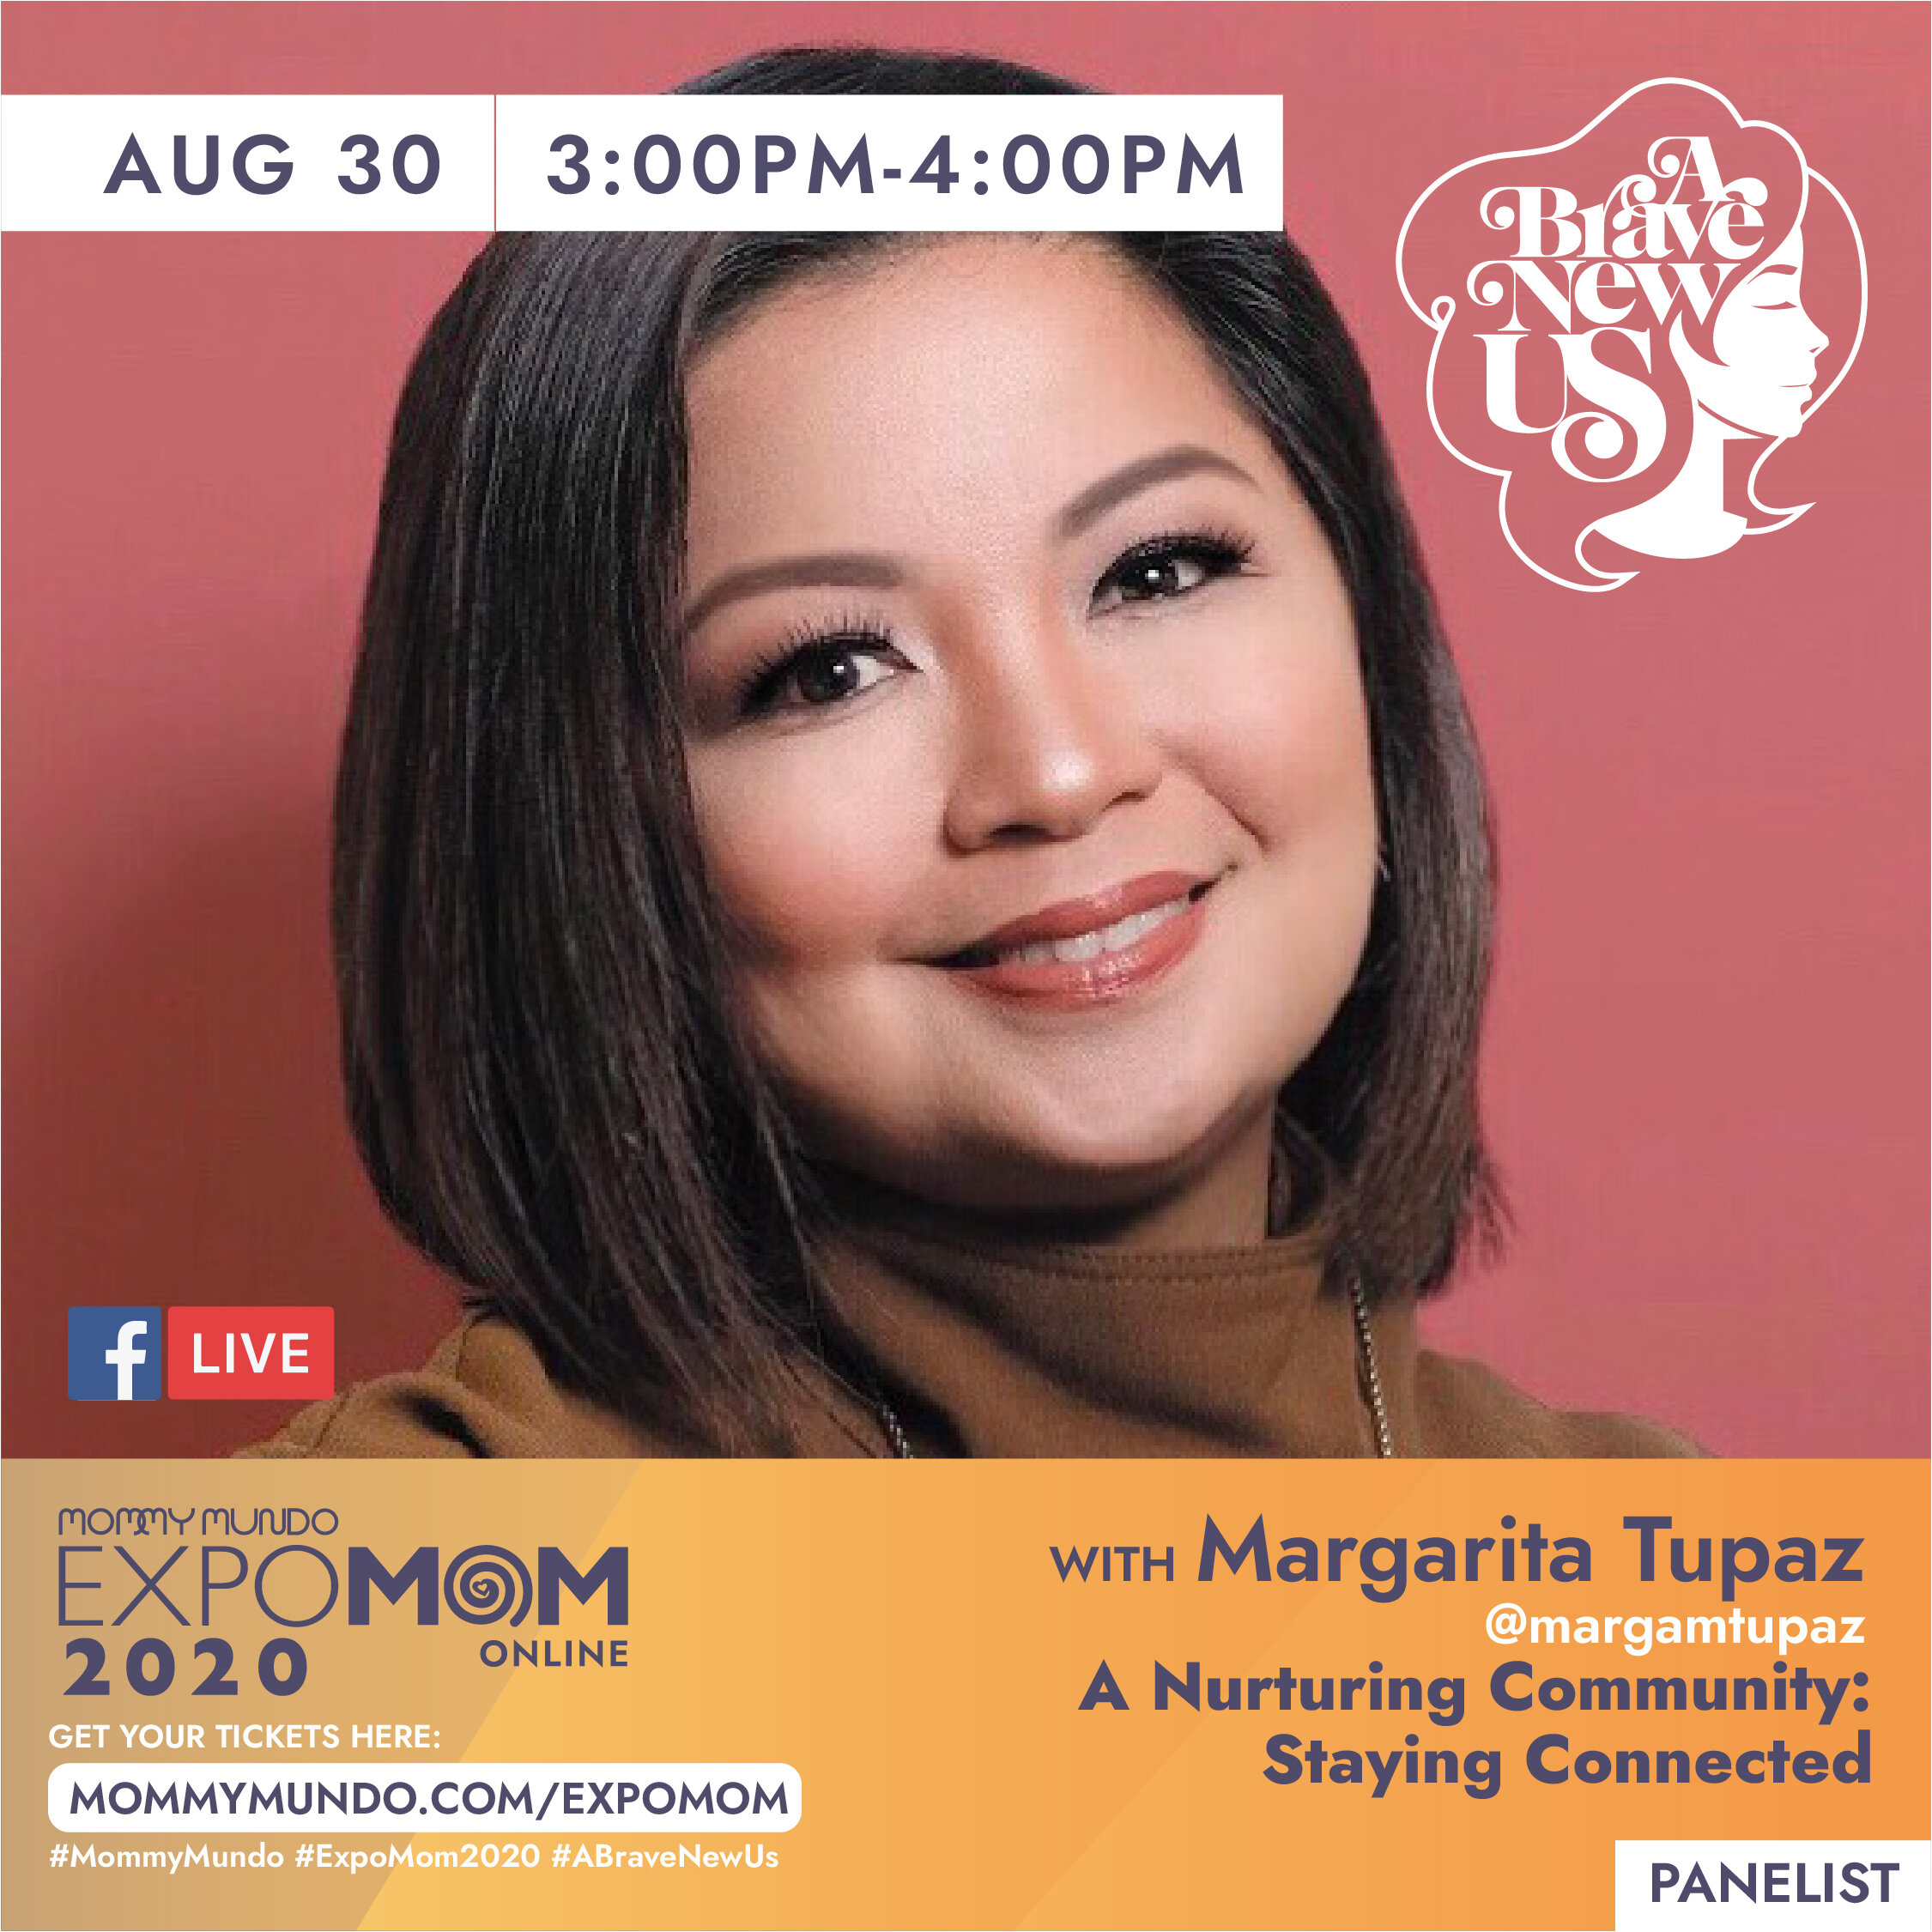  Editor in Chief of Modern Parenting PH, she is also the host of Real Talk while being a mom to 6 kids!    